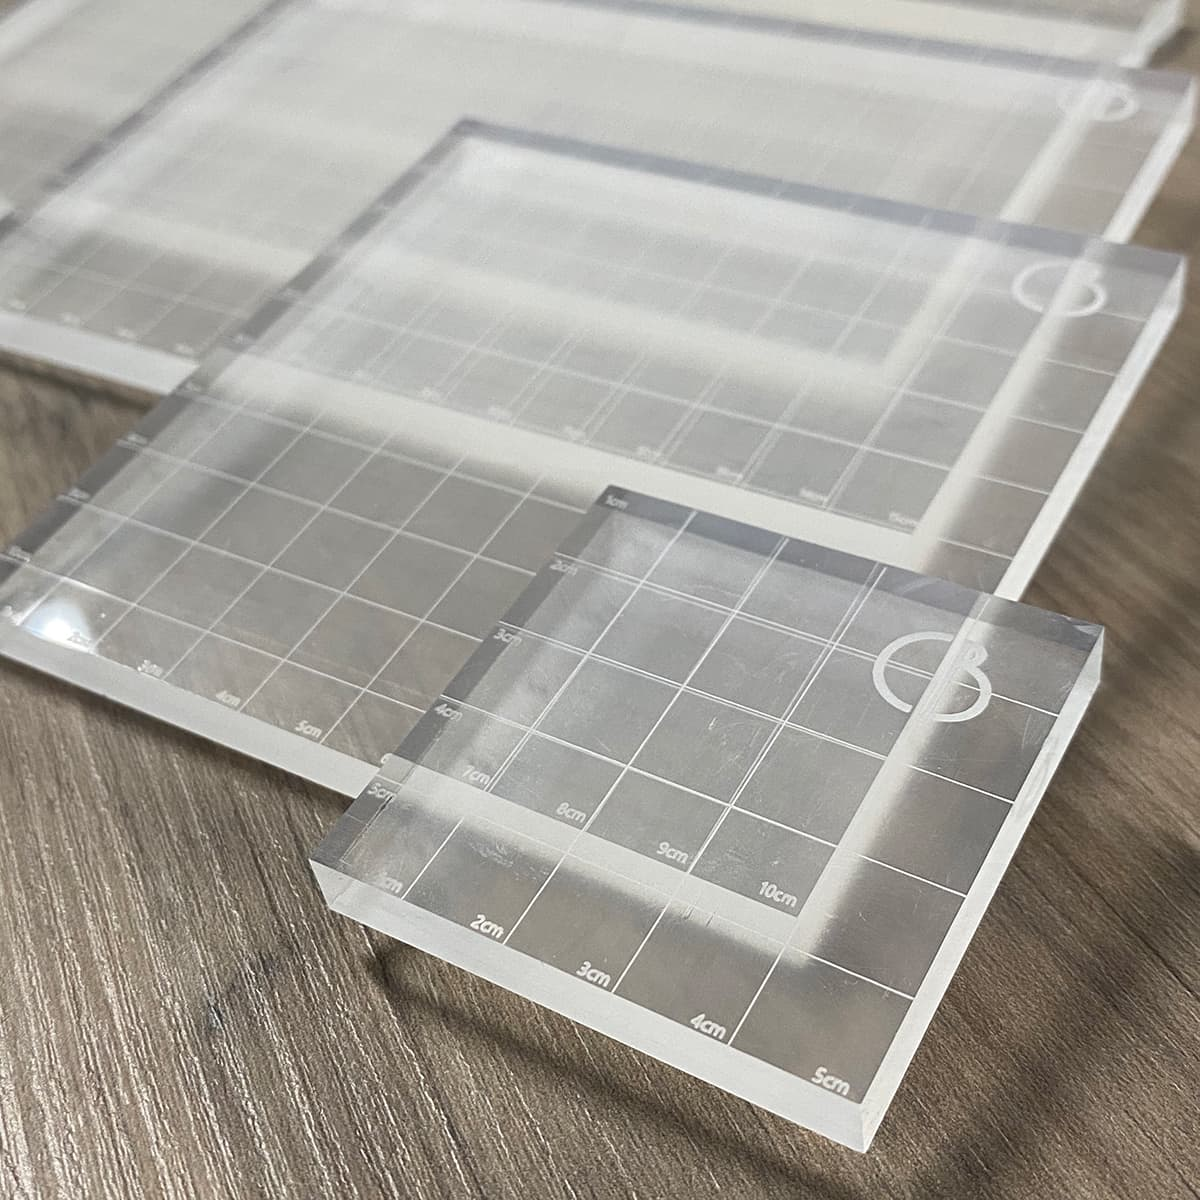 Ciao Bella Acrylic Block 10 x 10 cm With Grid Lines